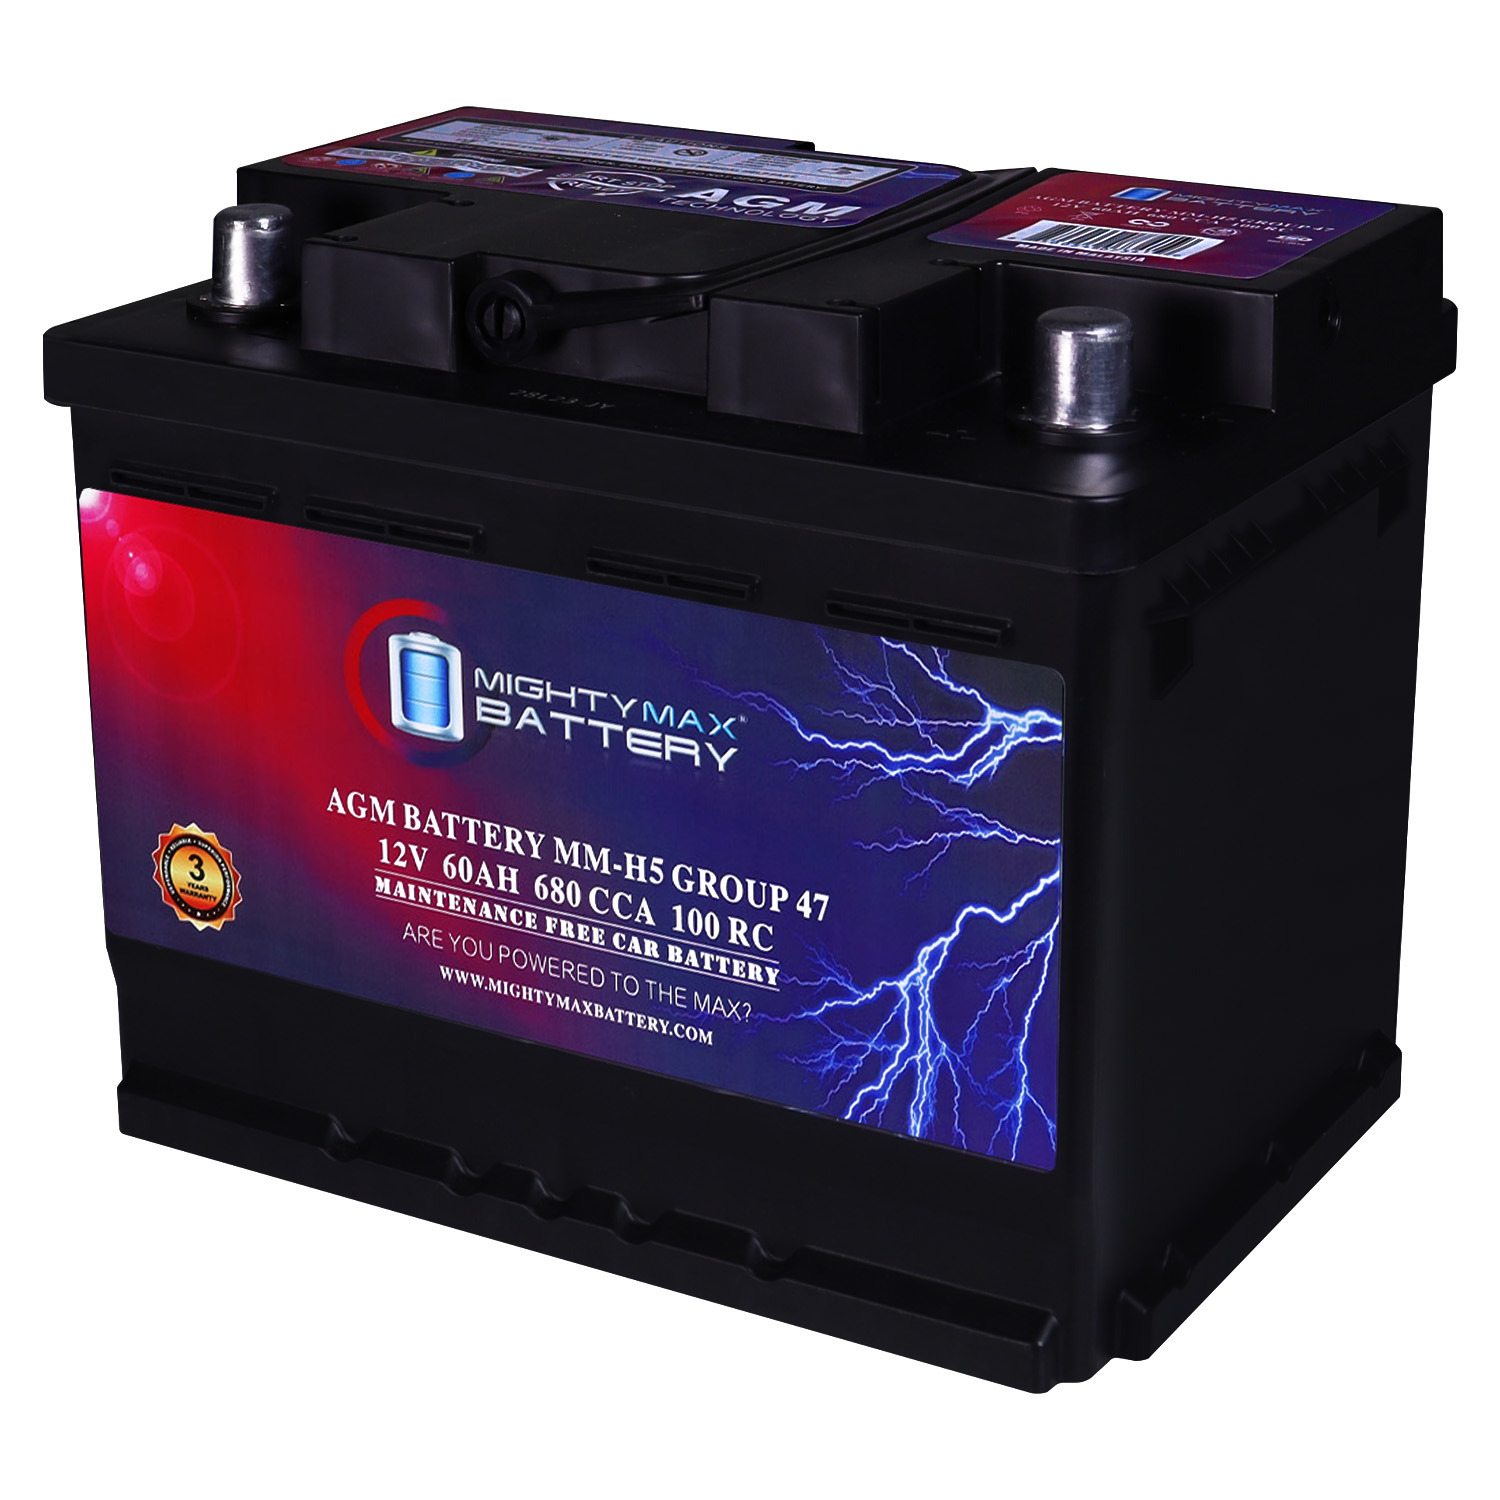 MM-H5 Group 47 12V 60AH 100RC 680CCA Replacement Battery Compatible with Peugeot 206 (Non-US/Canada) 98